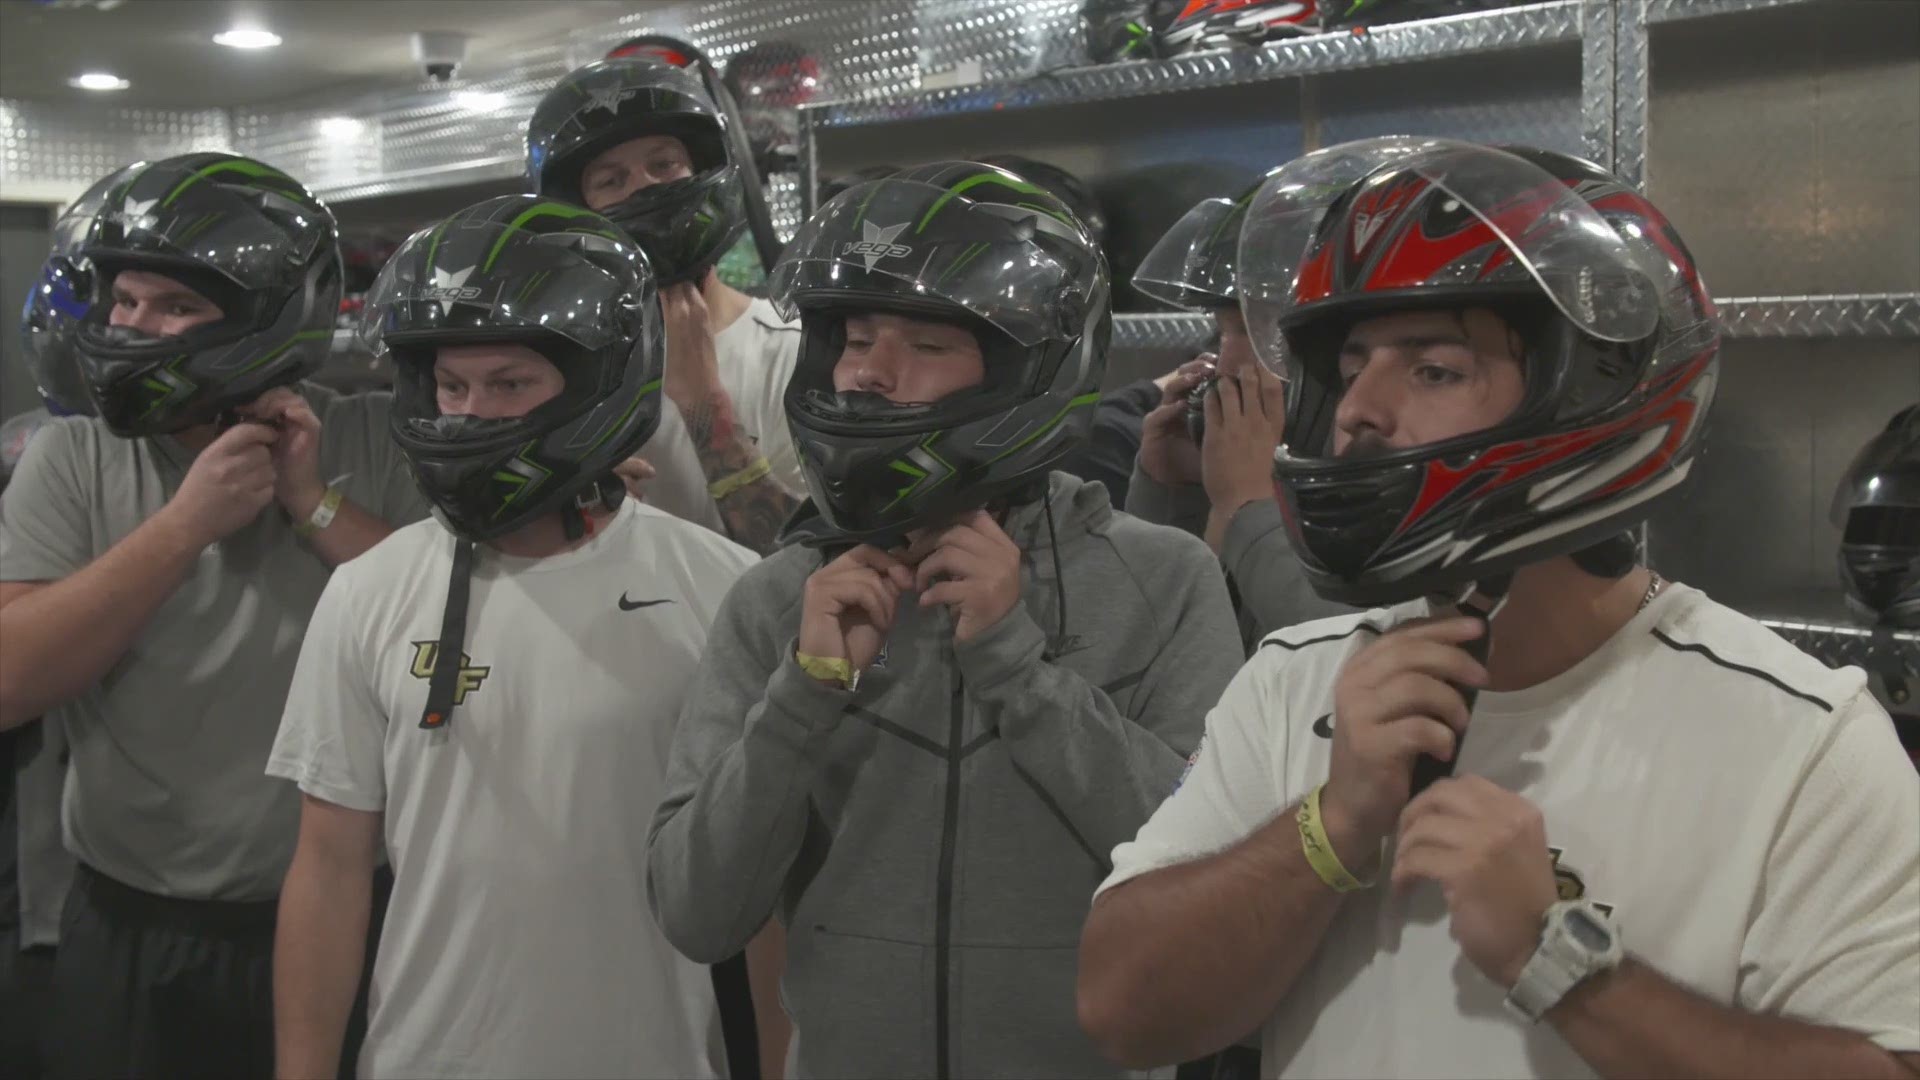 Andretti Indoor Karting and Games closes in Roswell, moving to new Gwinnett County location